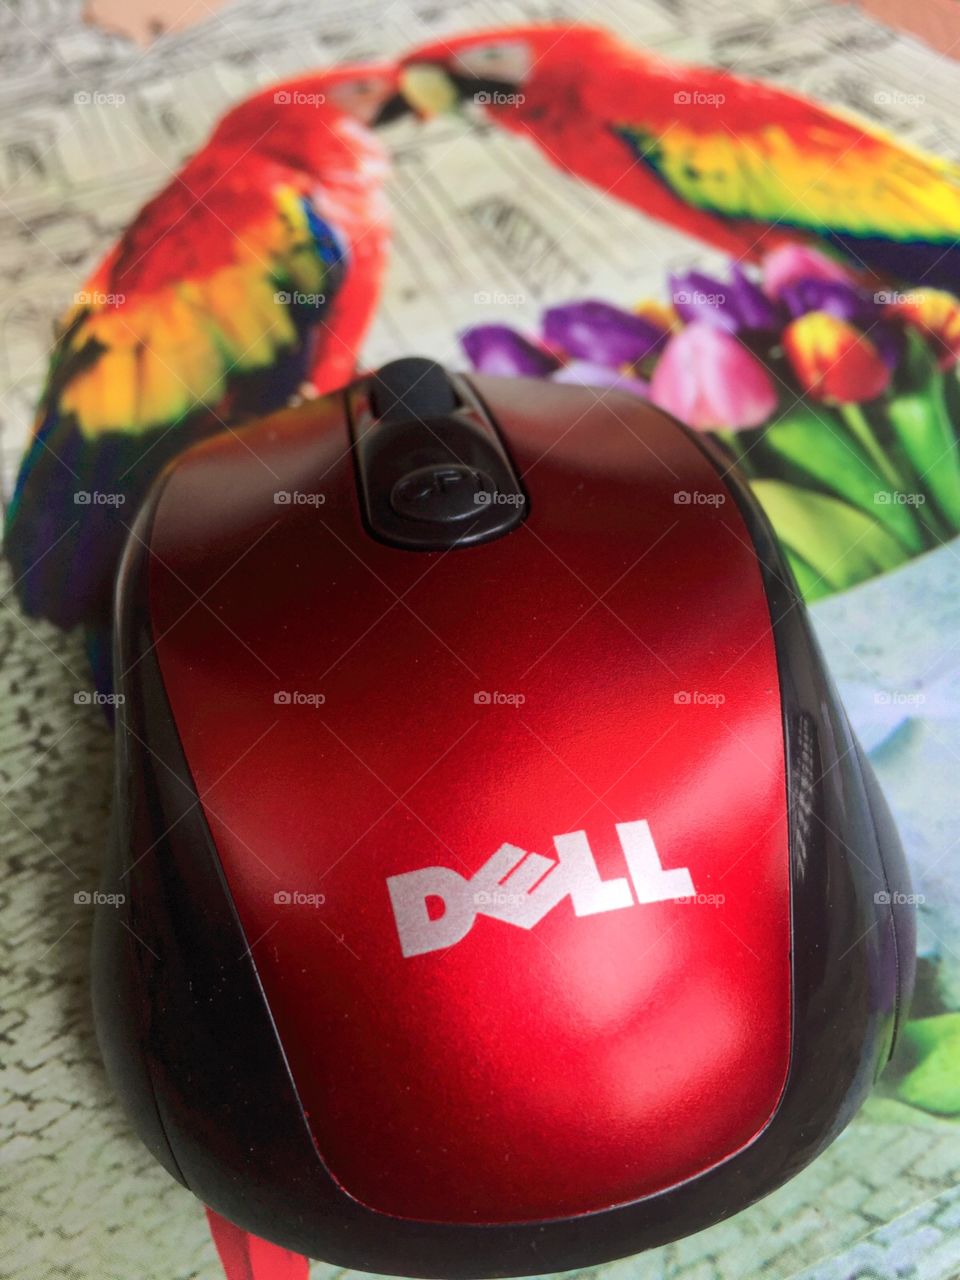 DELL mouse.